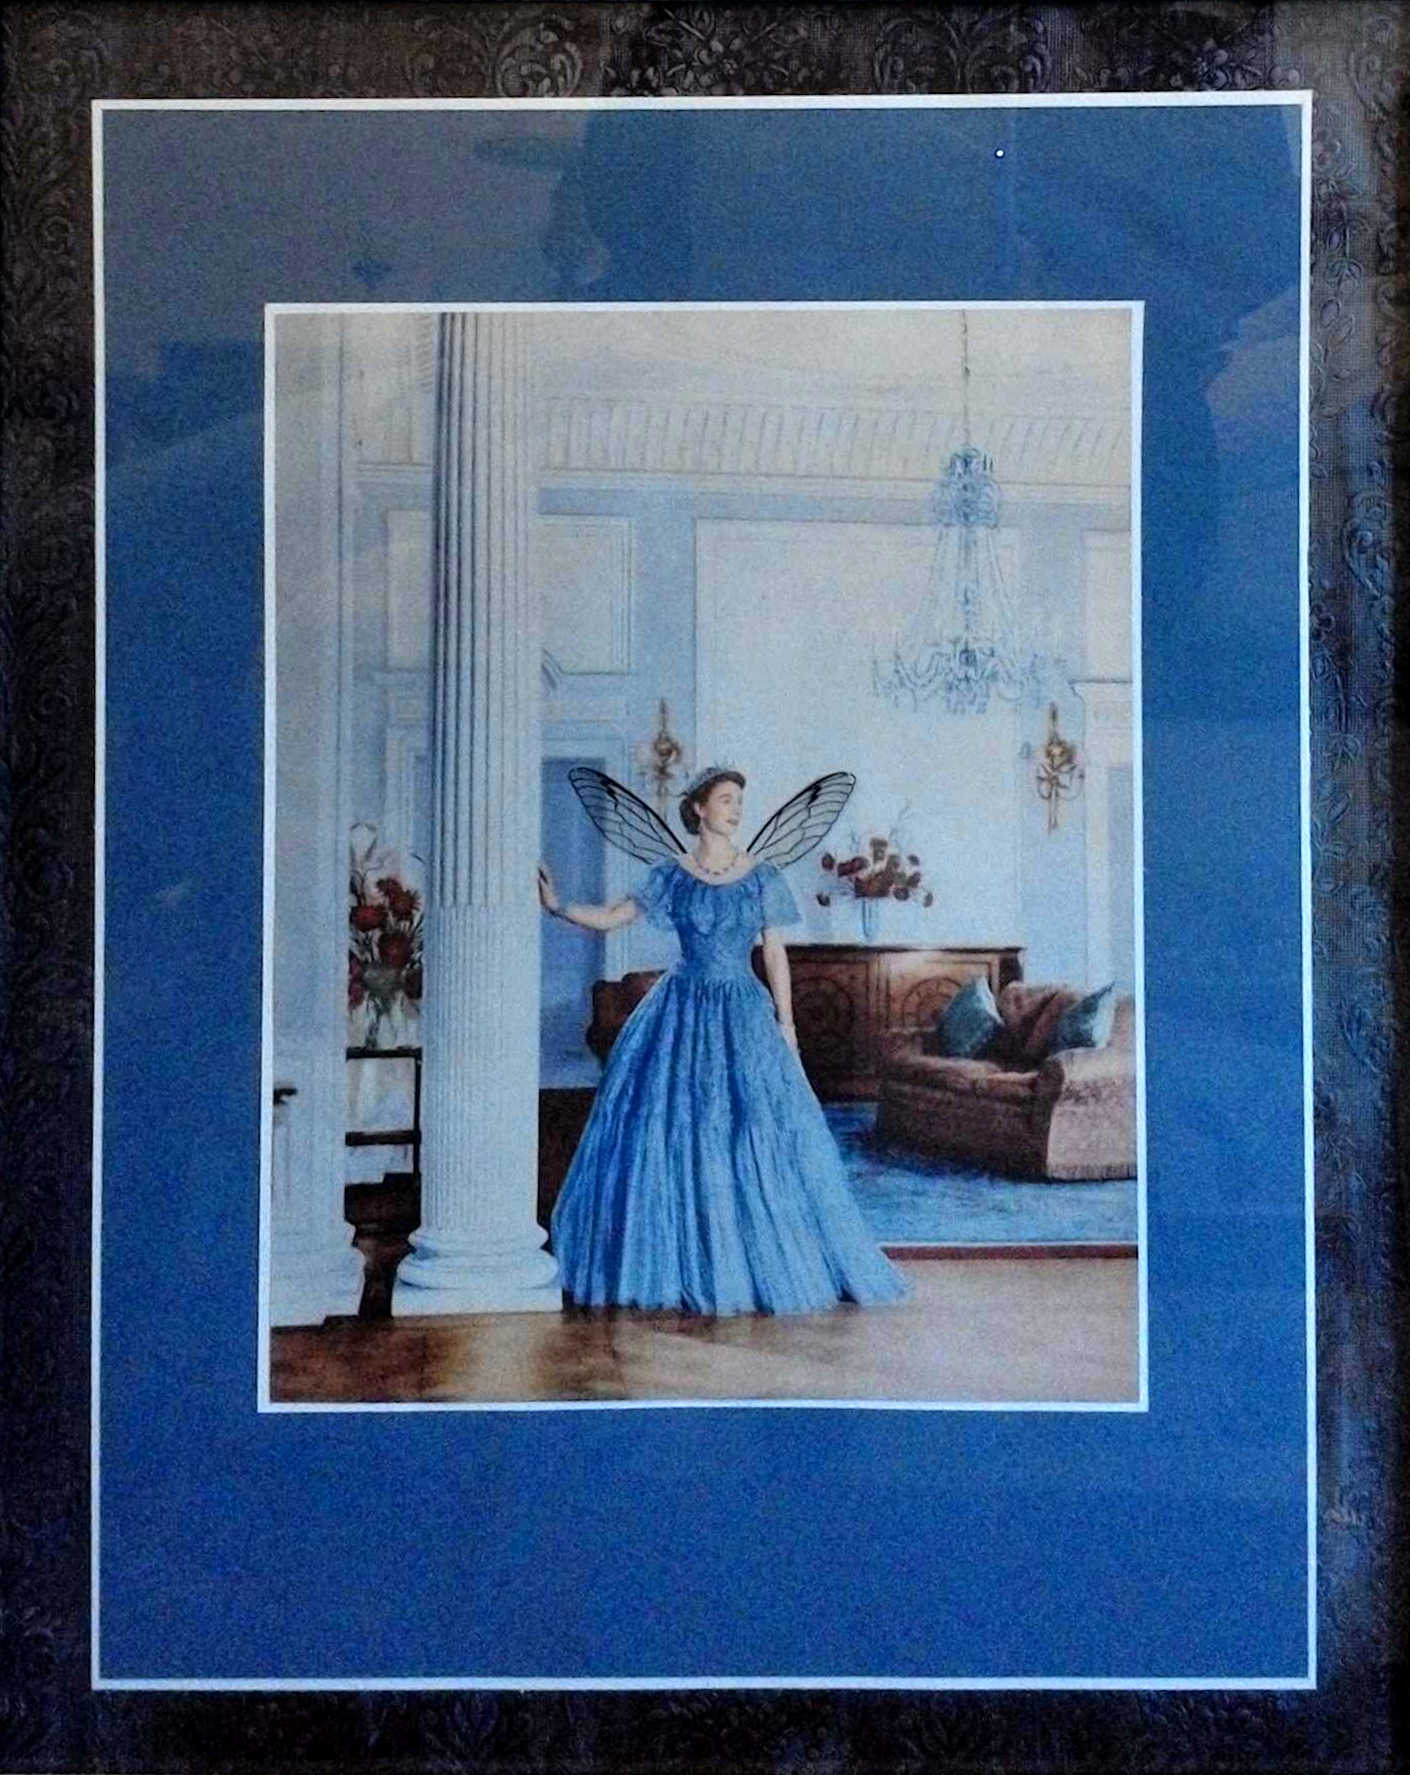 Collage work "Elizabeth" by Libby Bloxham. A layered border of navy blue embossed material and royal blue matte board frames an illustration of a young Queen Elizabeth II, wearing a blue gown as she stands by a white column in a siting room. Acetate insect wings have been positioned at her shoulders.